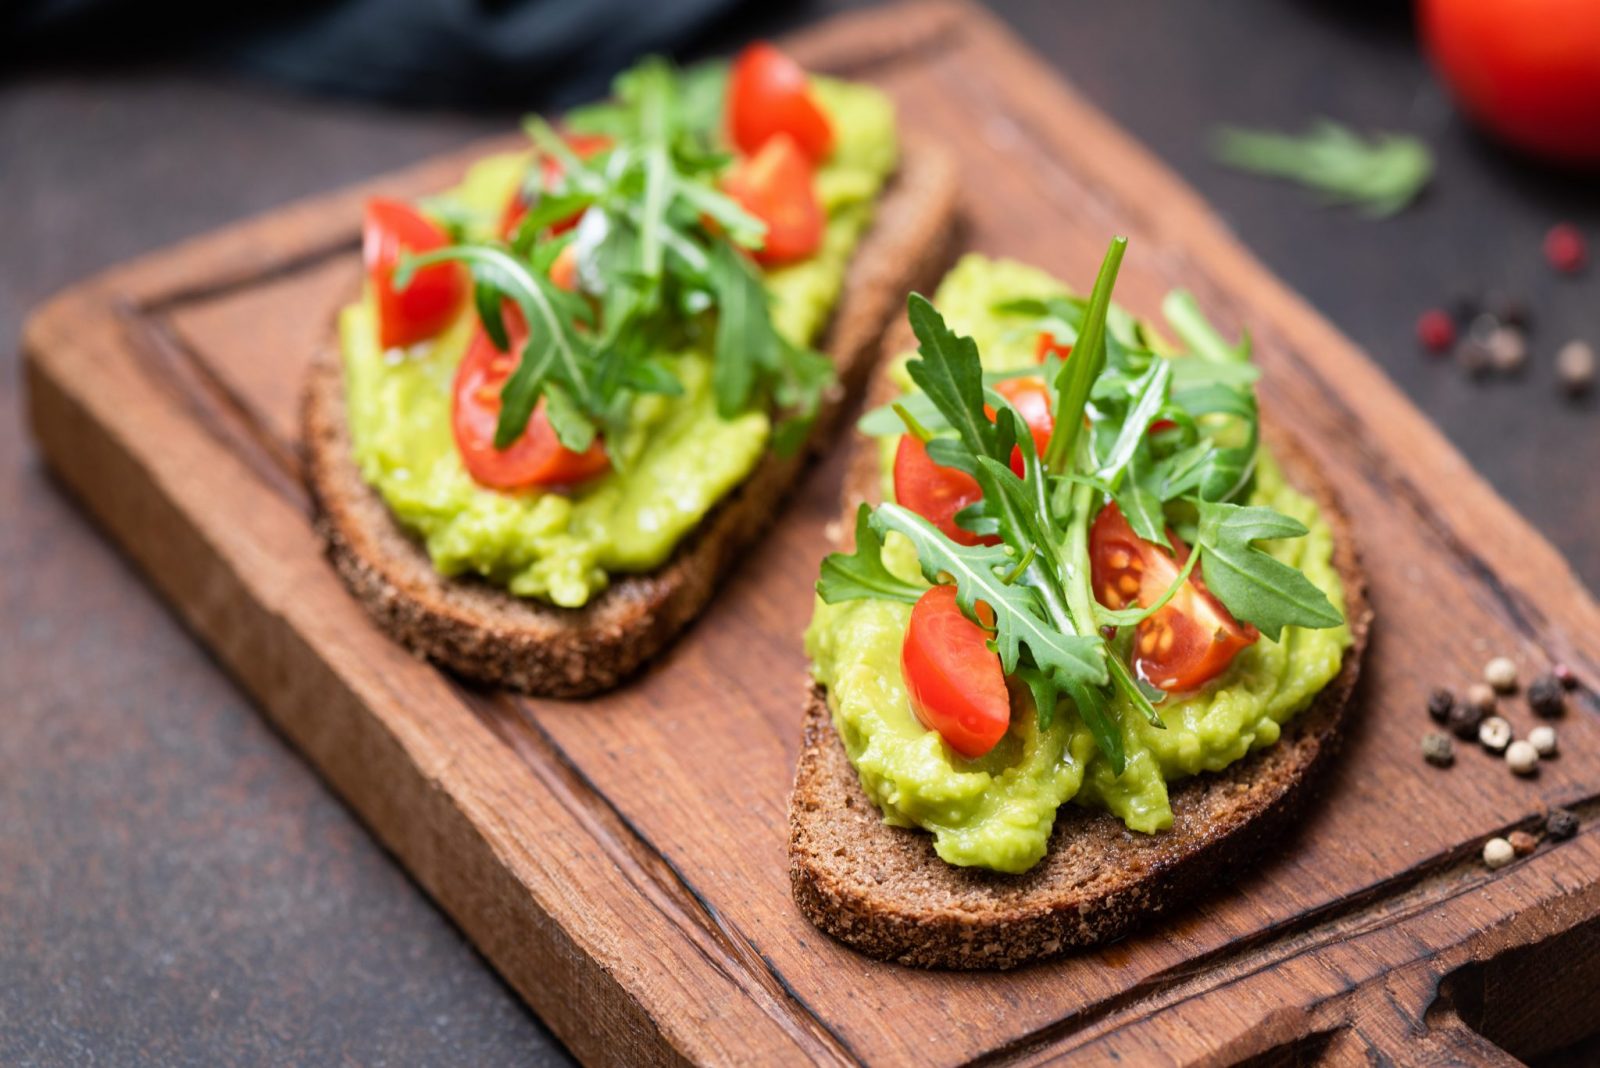 🥗 How Many of These Healthy Food Trends Have You Tried? Avocado Toast